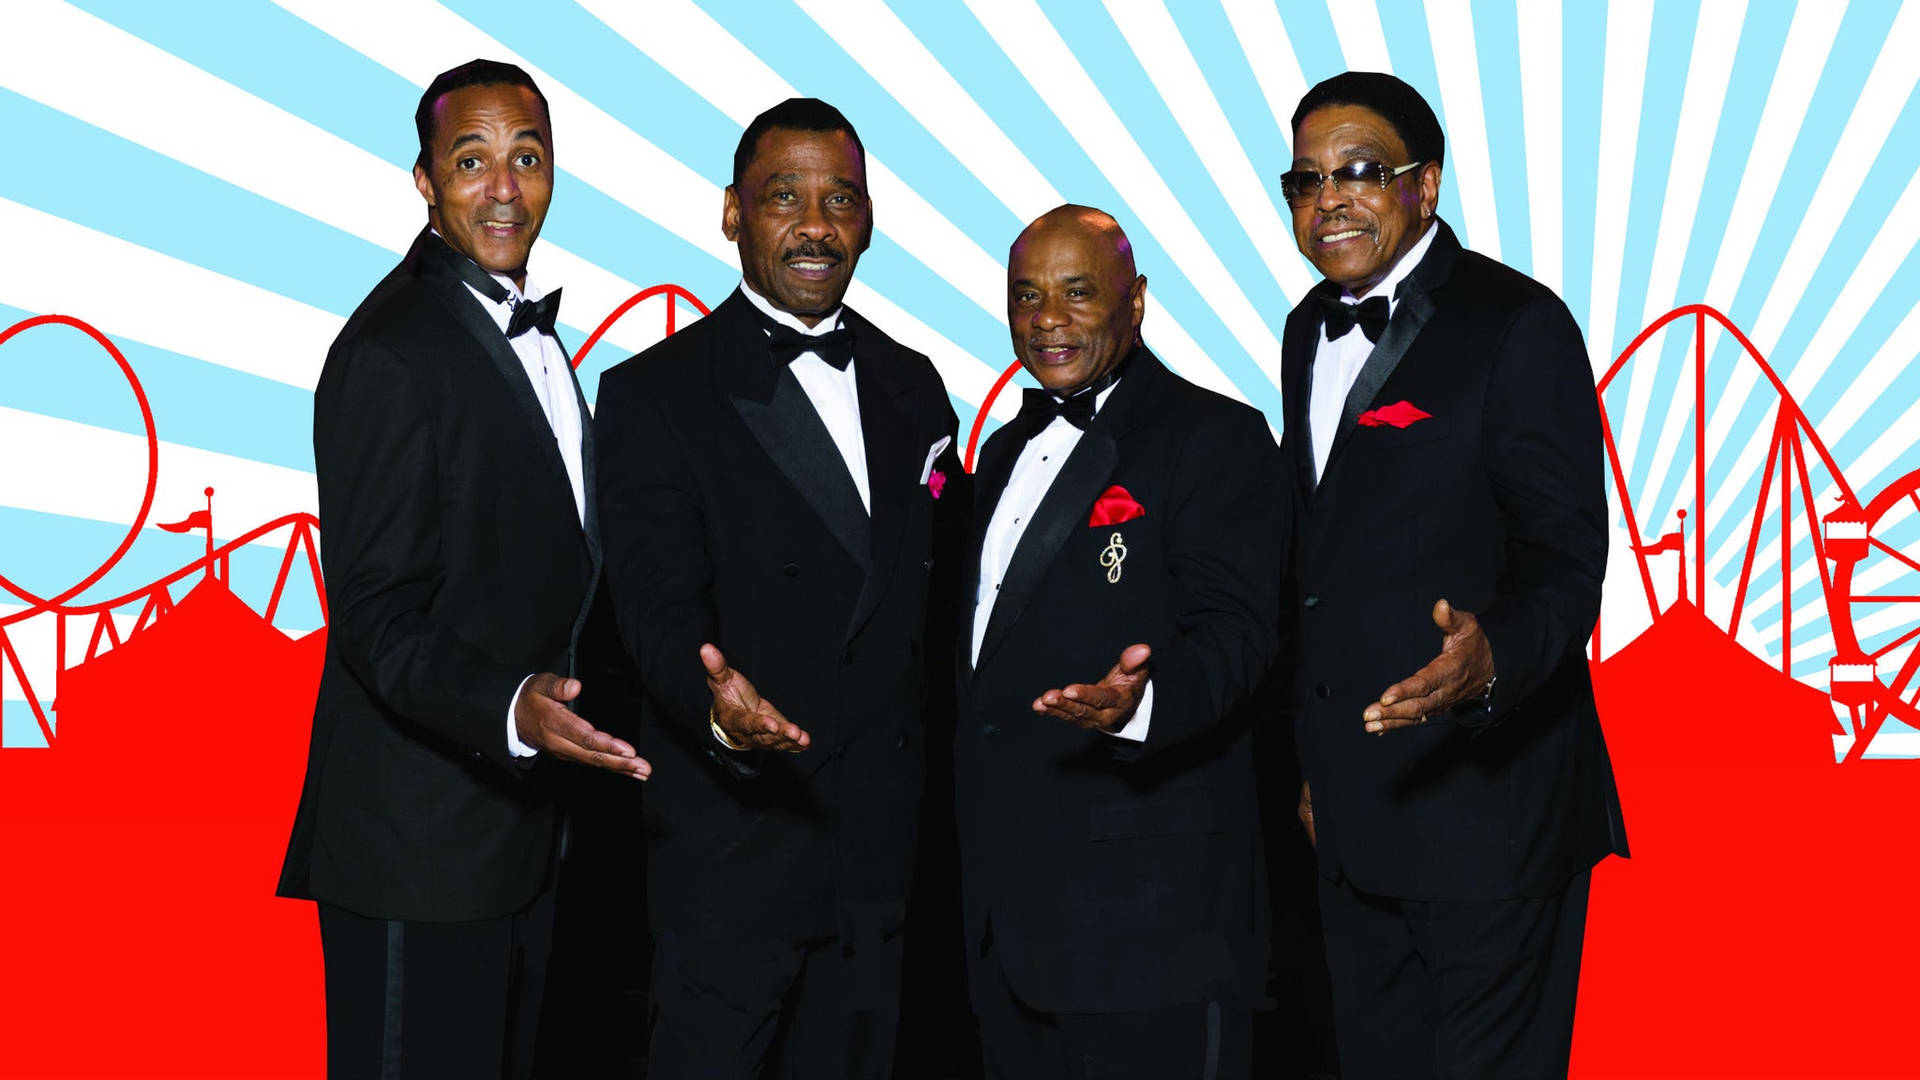 The Drifters Vocal Group Wallpaper